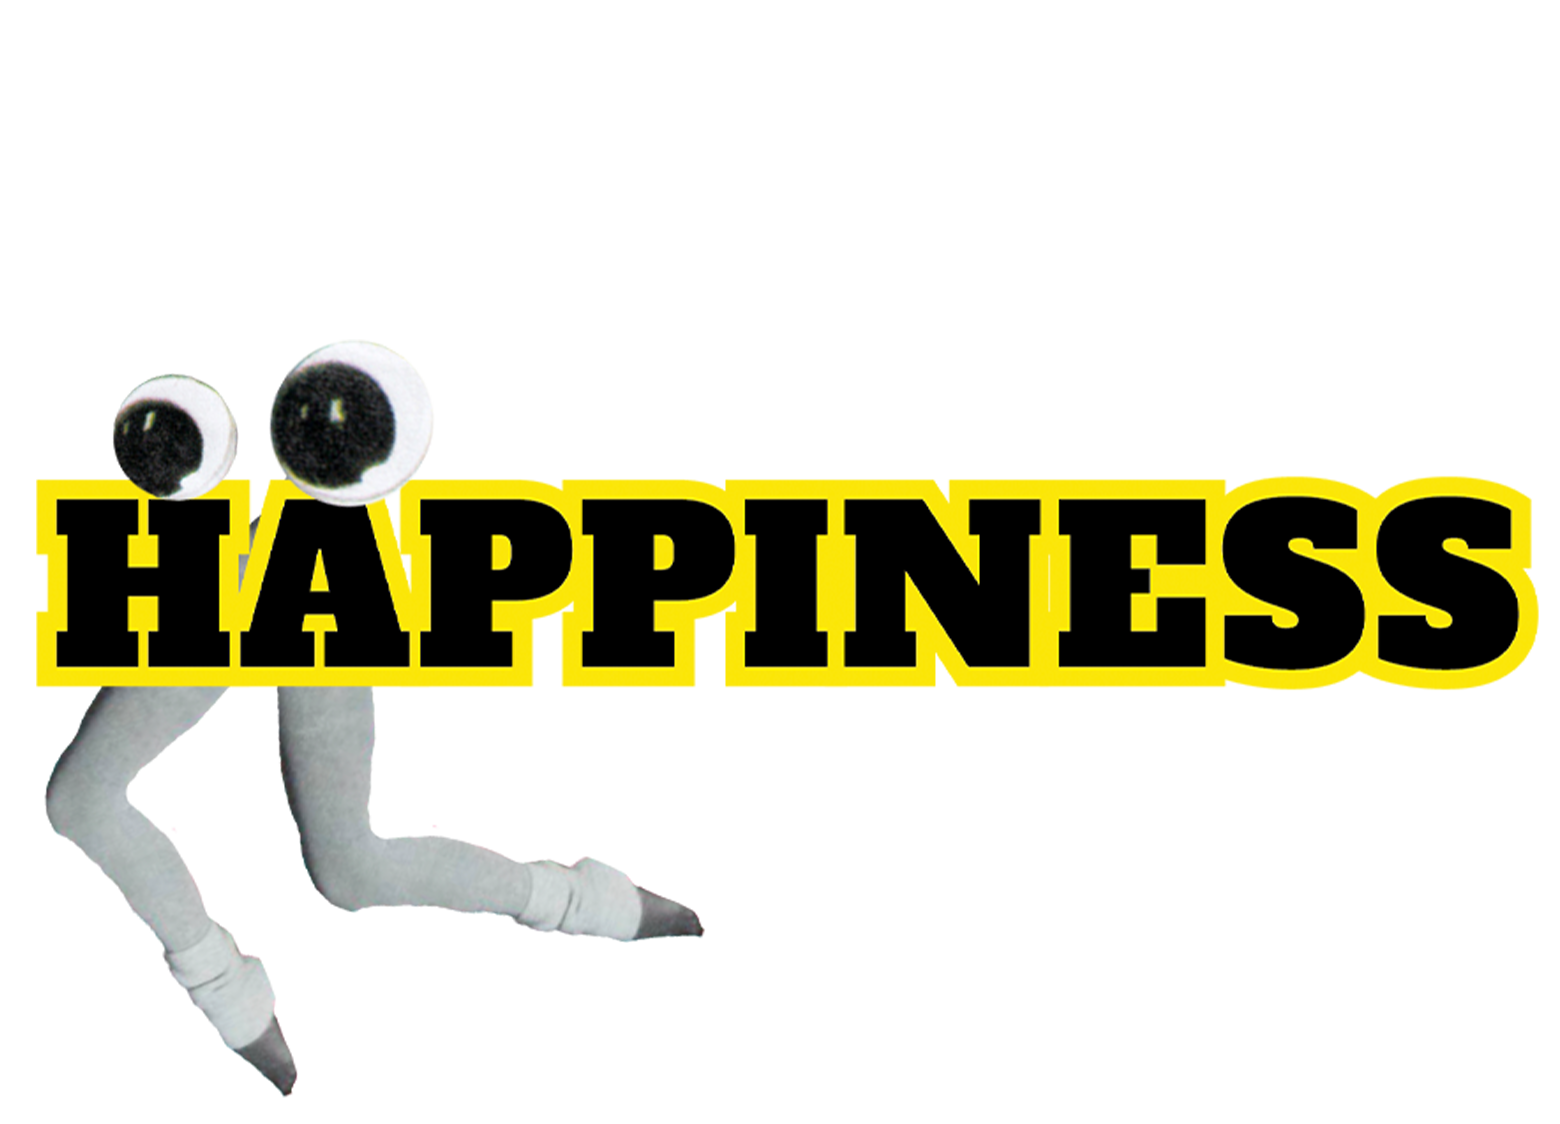 My Goddamn Quest for Happiness